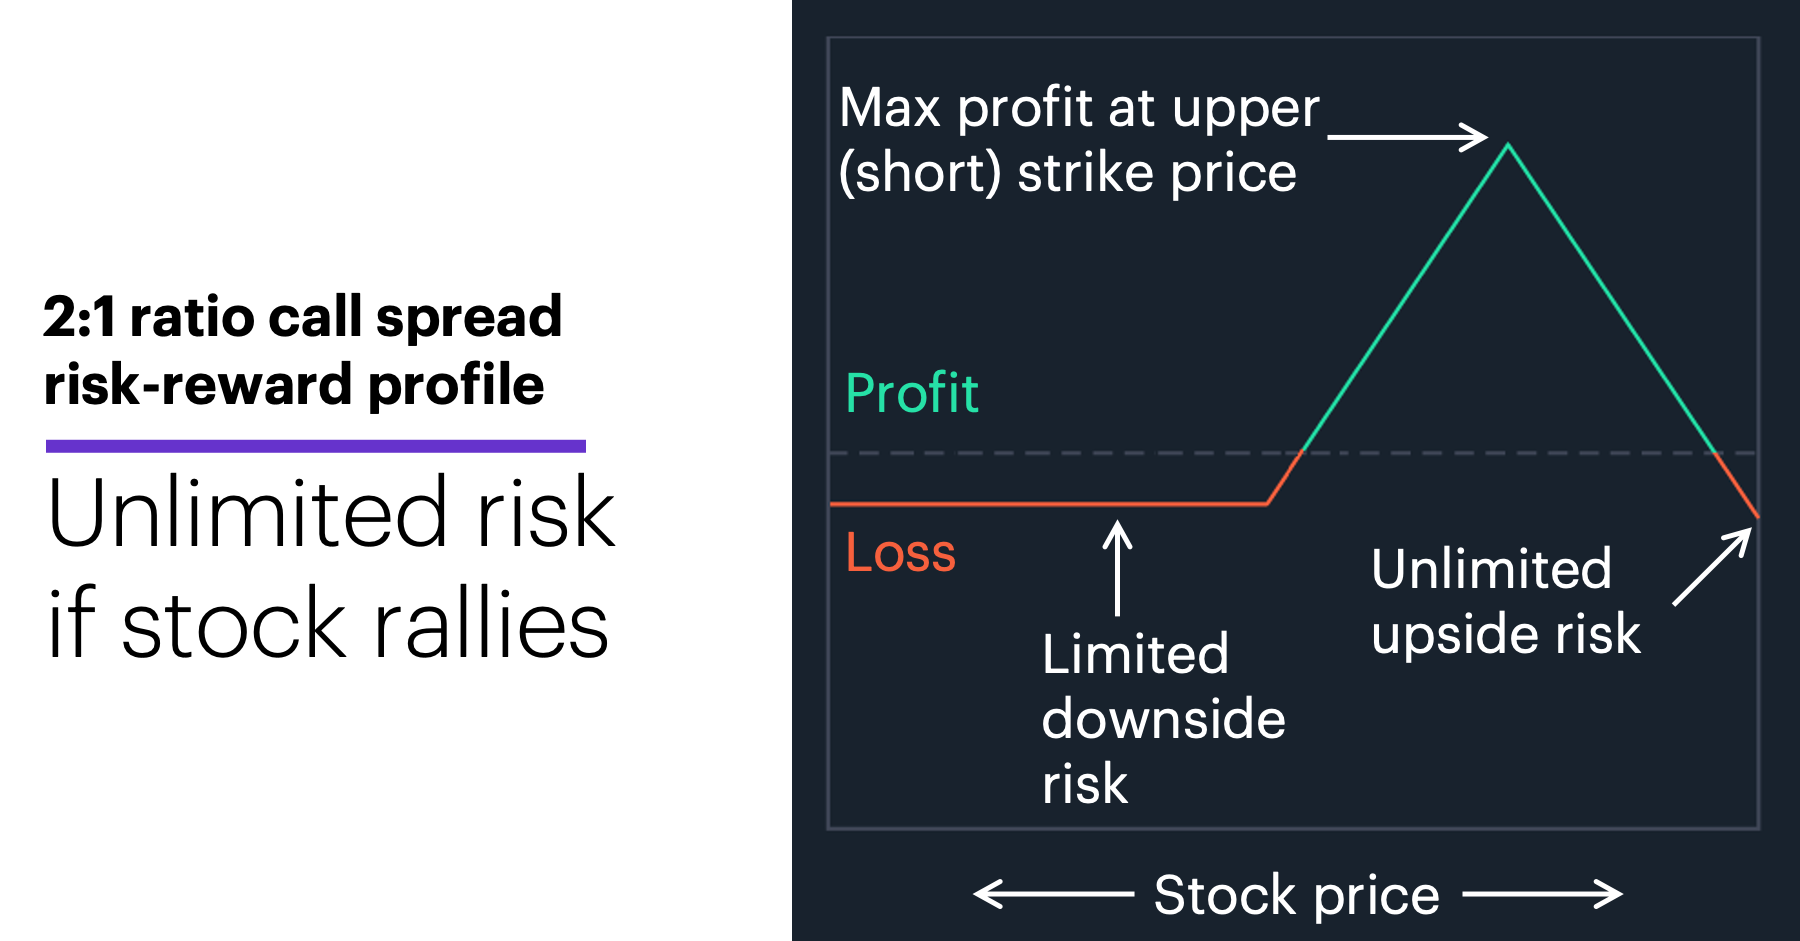 Chart 2: 2:1 ratio call spread risk-reward profile. Options spread strategy profile. Unlimited risk if stock rallies.